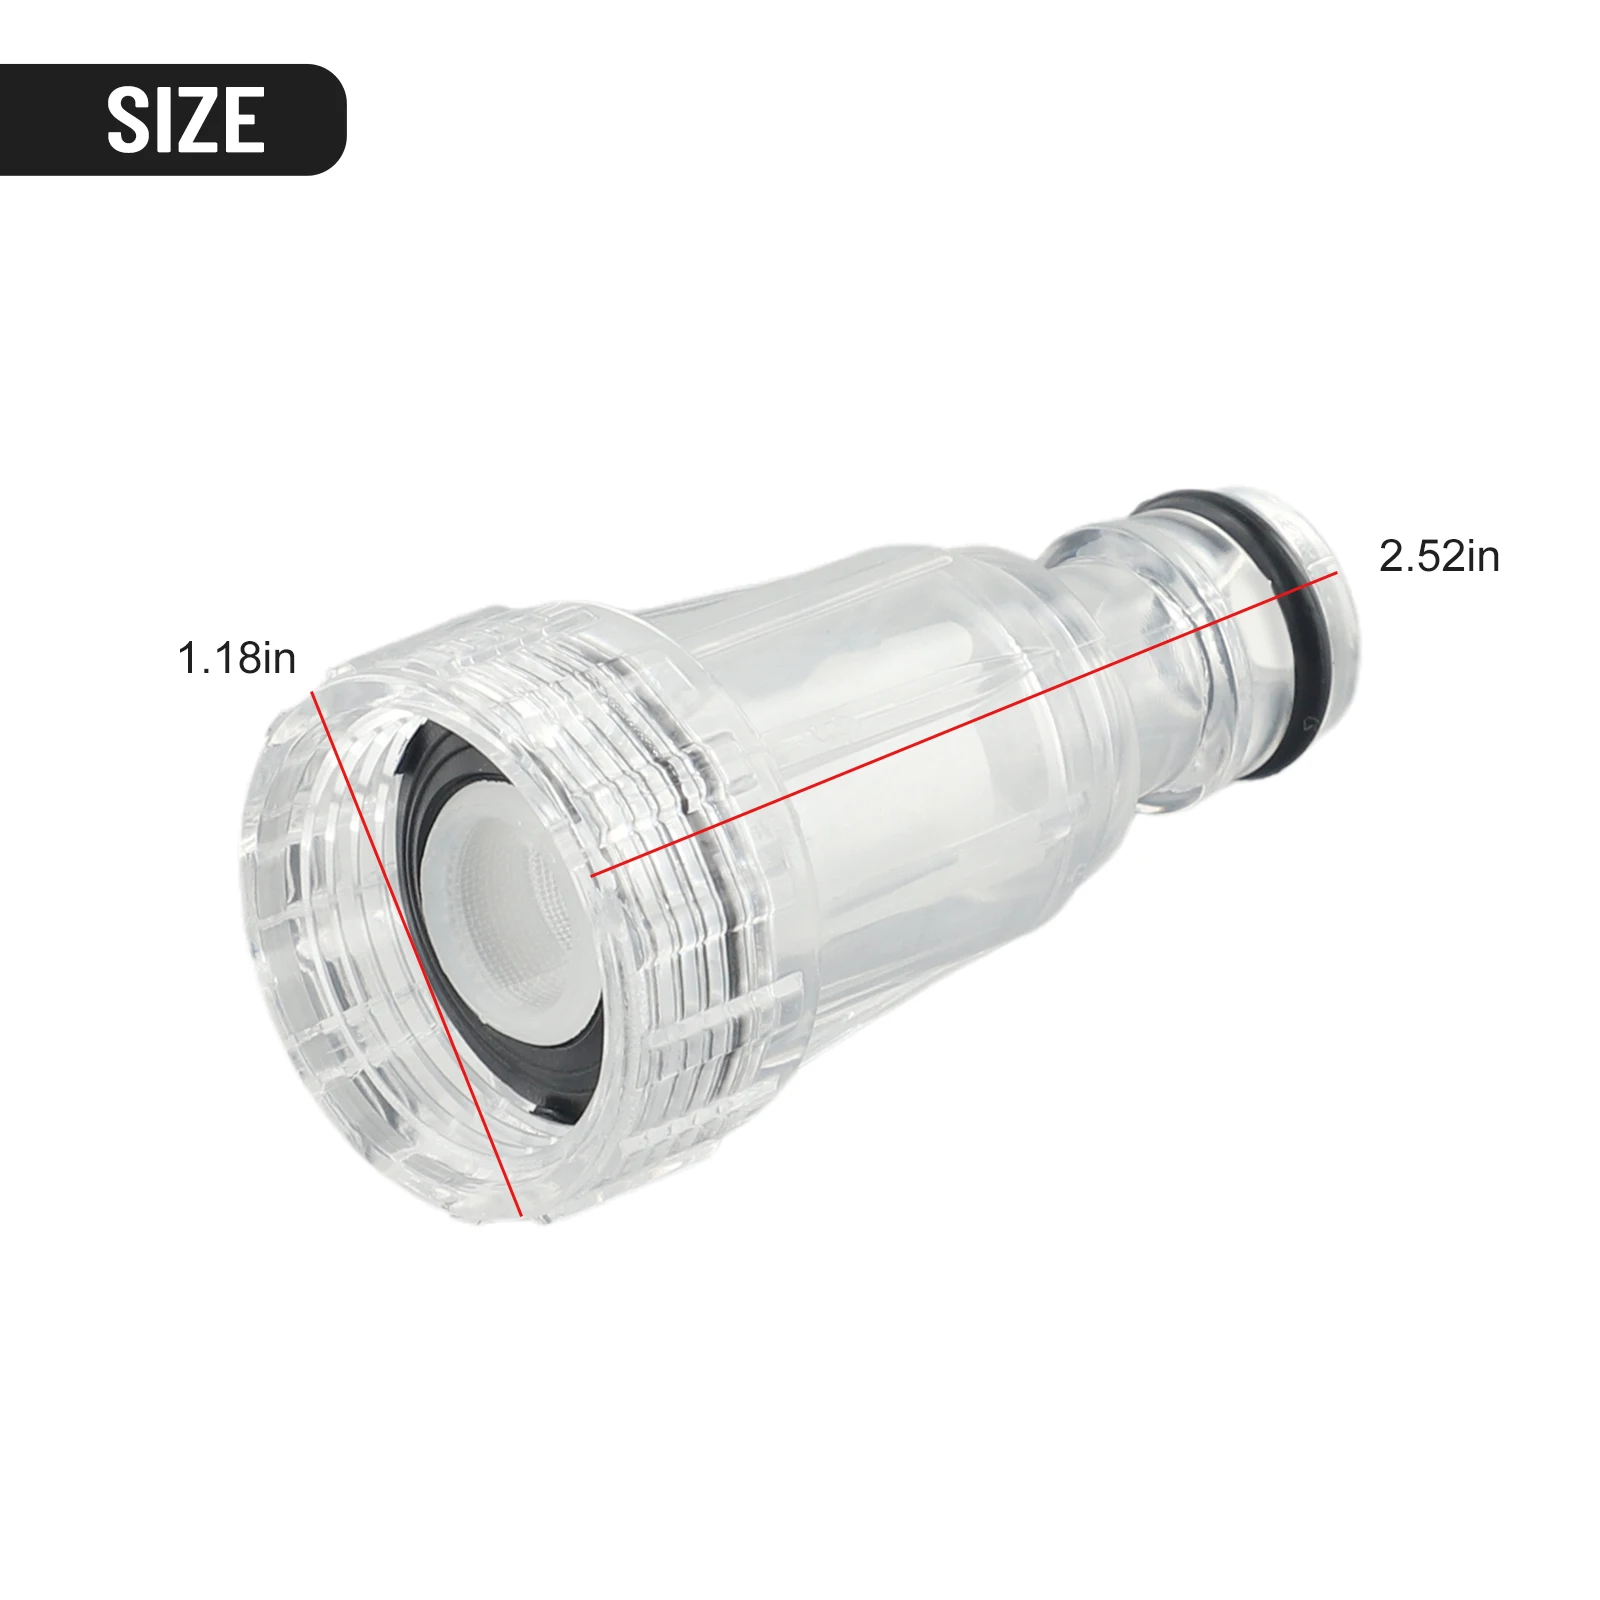 1pcs High Pressure Connection Filter+2pcs Nets For For Karcher K2-K7 Series Washer Garden Pipe Hose Adapter  Pressure Washers new sale fashion connection motorcycle middle exhaust pipe for yzf r1 muffler